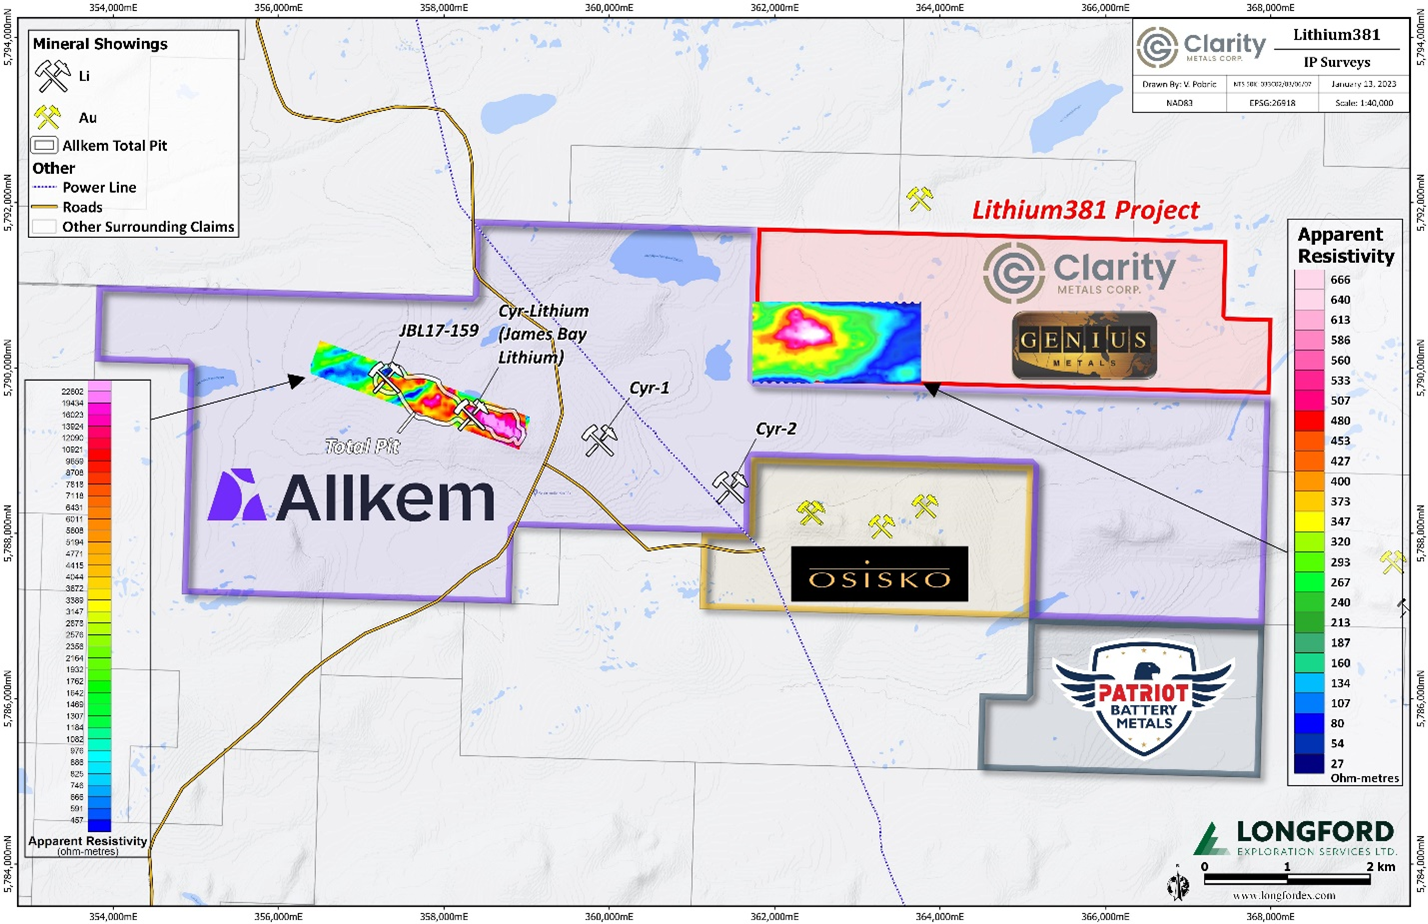 Preliminary resistivity results on Lithium381 Project and Allkem Limited’s 2008 IP Resistivity survey in the area of their open pit. Note the surveys are at different scales.